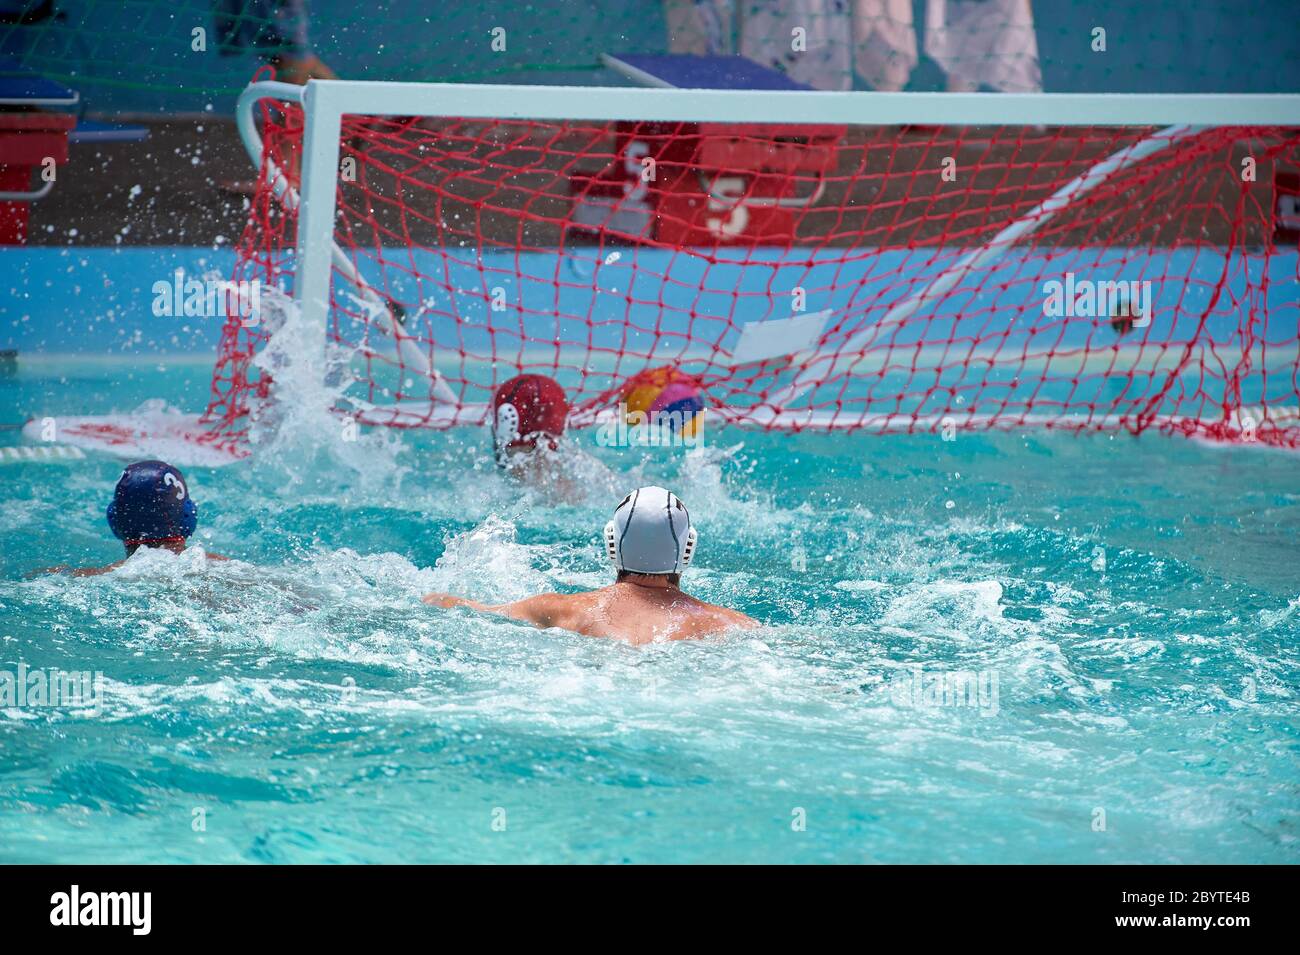 A water polo player scores a goal, goalkeeper misses the ball went into the net Stock Photo